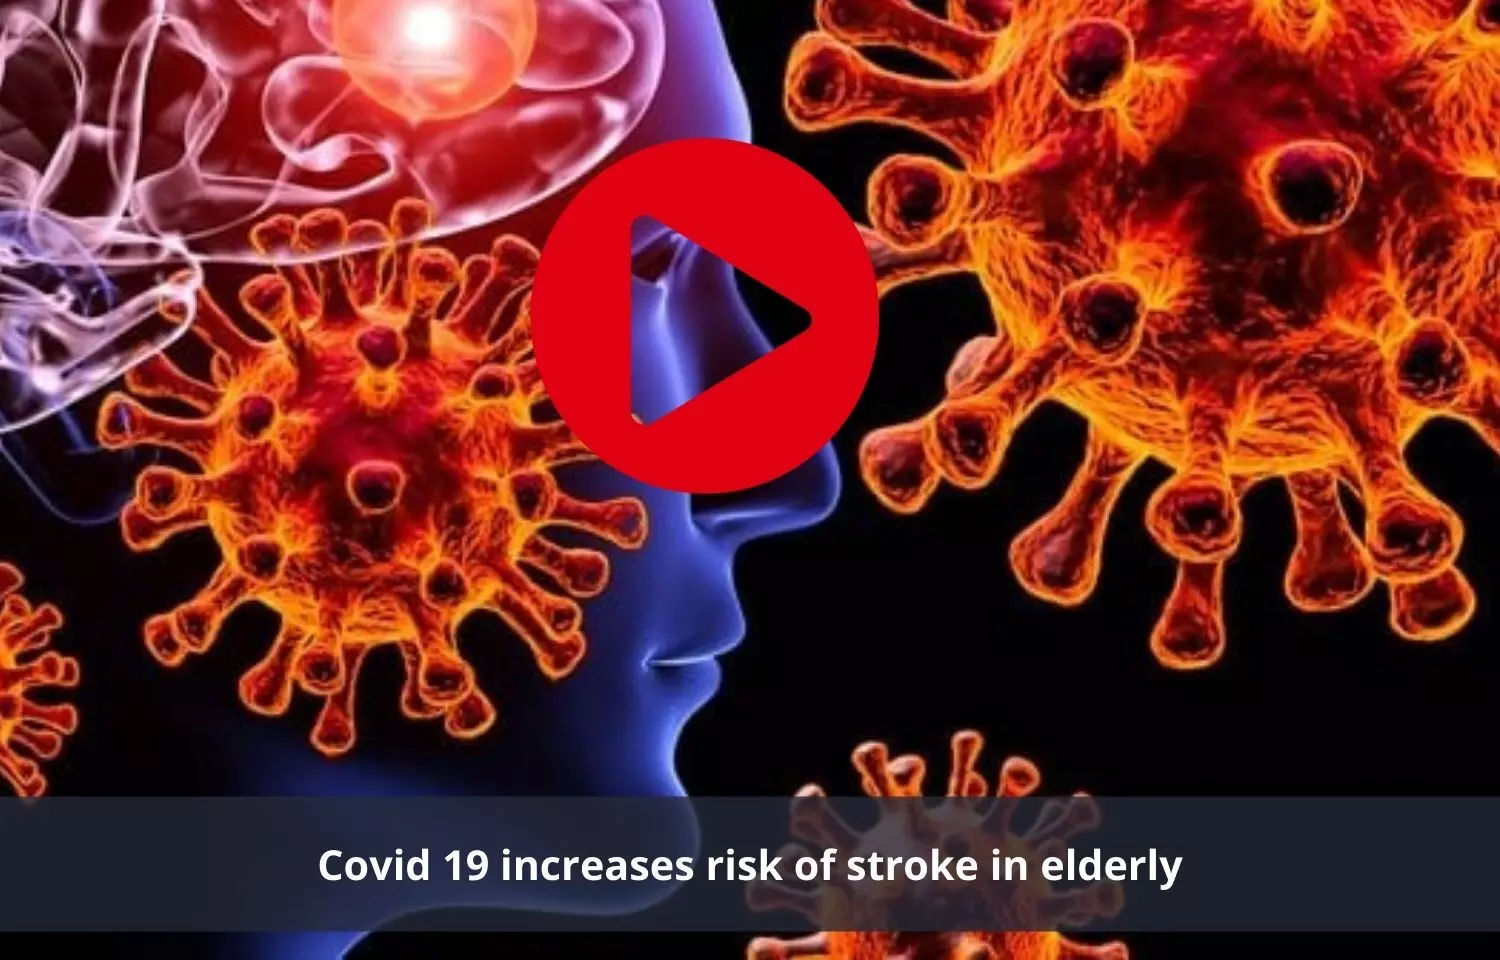 Covid 19 to be a cause of stroke in elderly